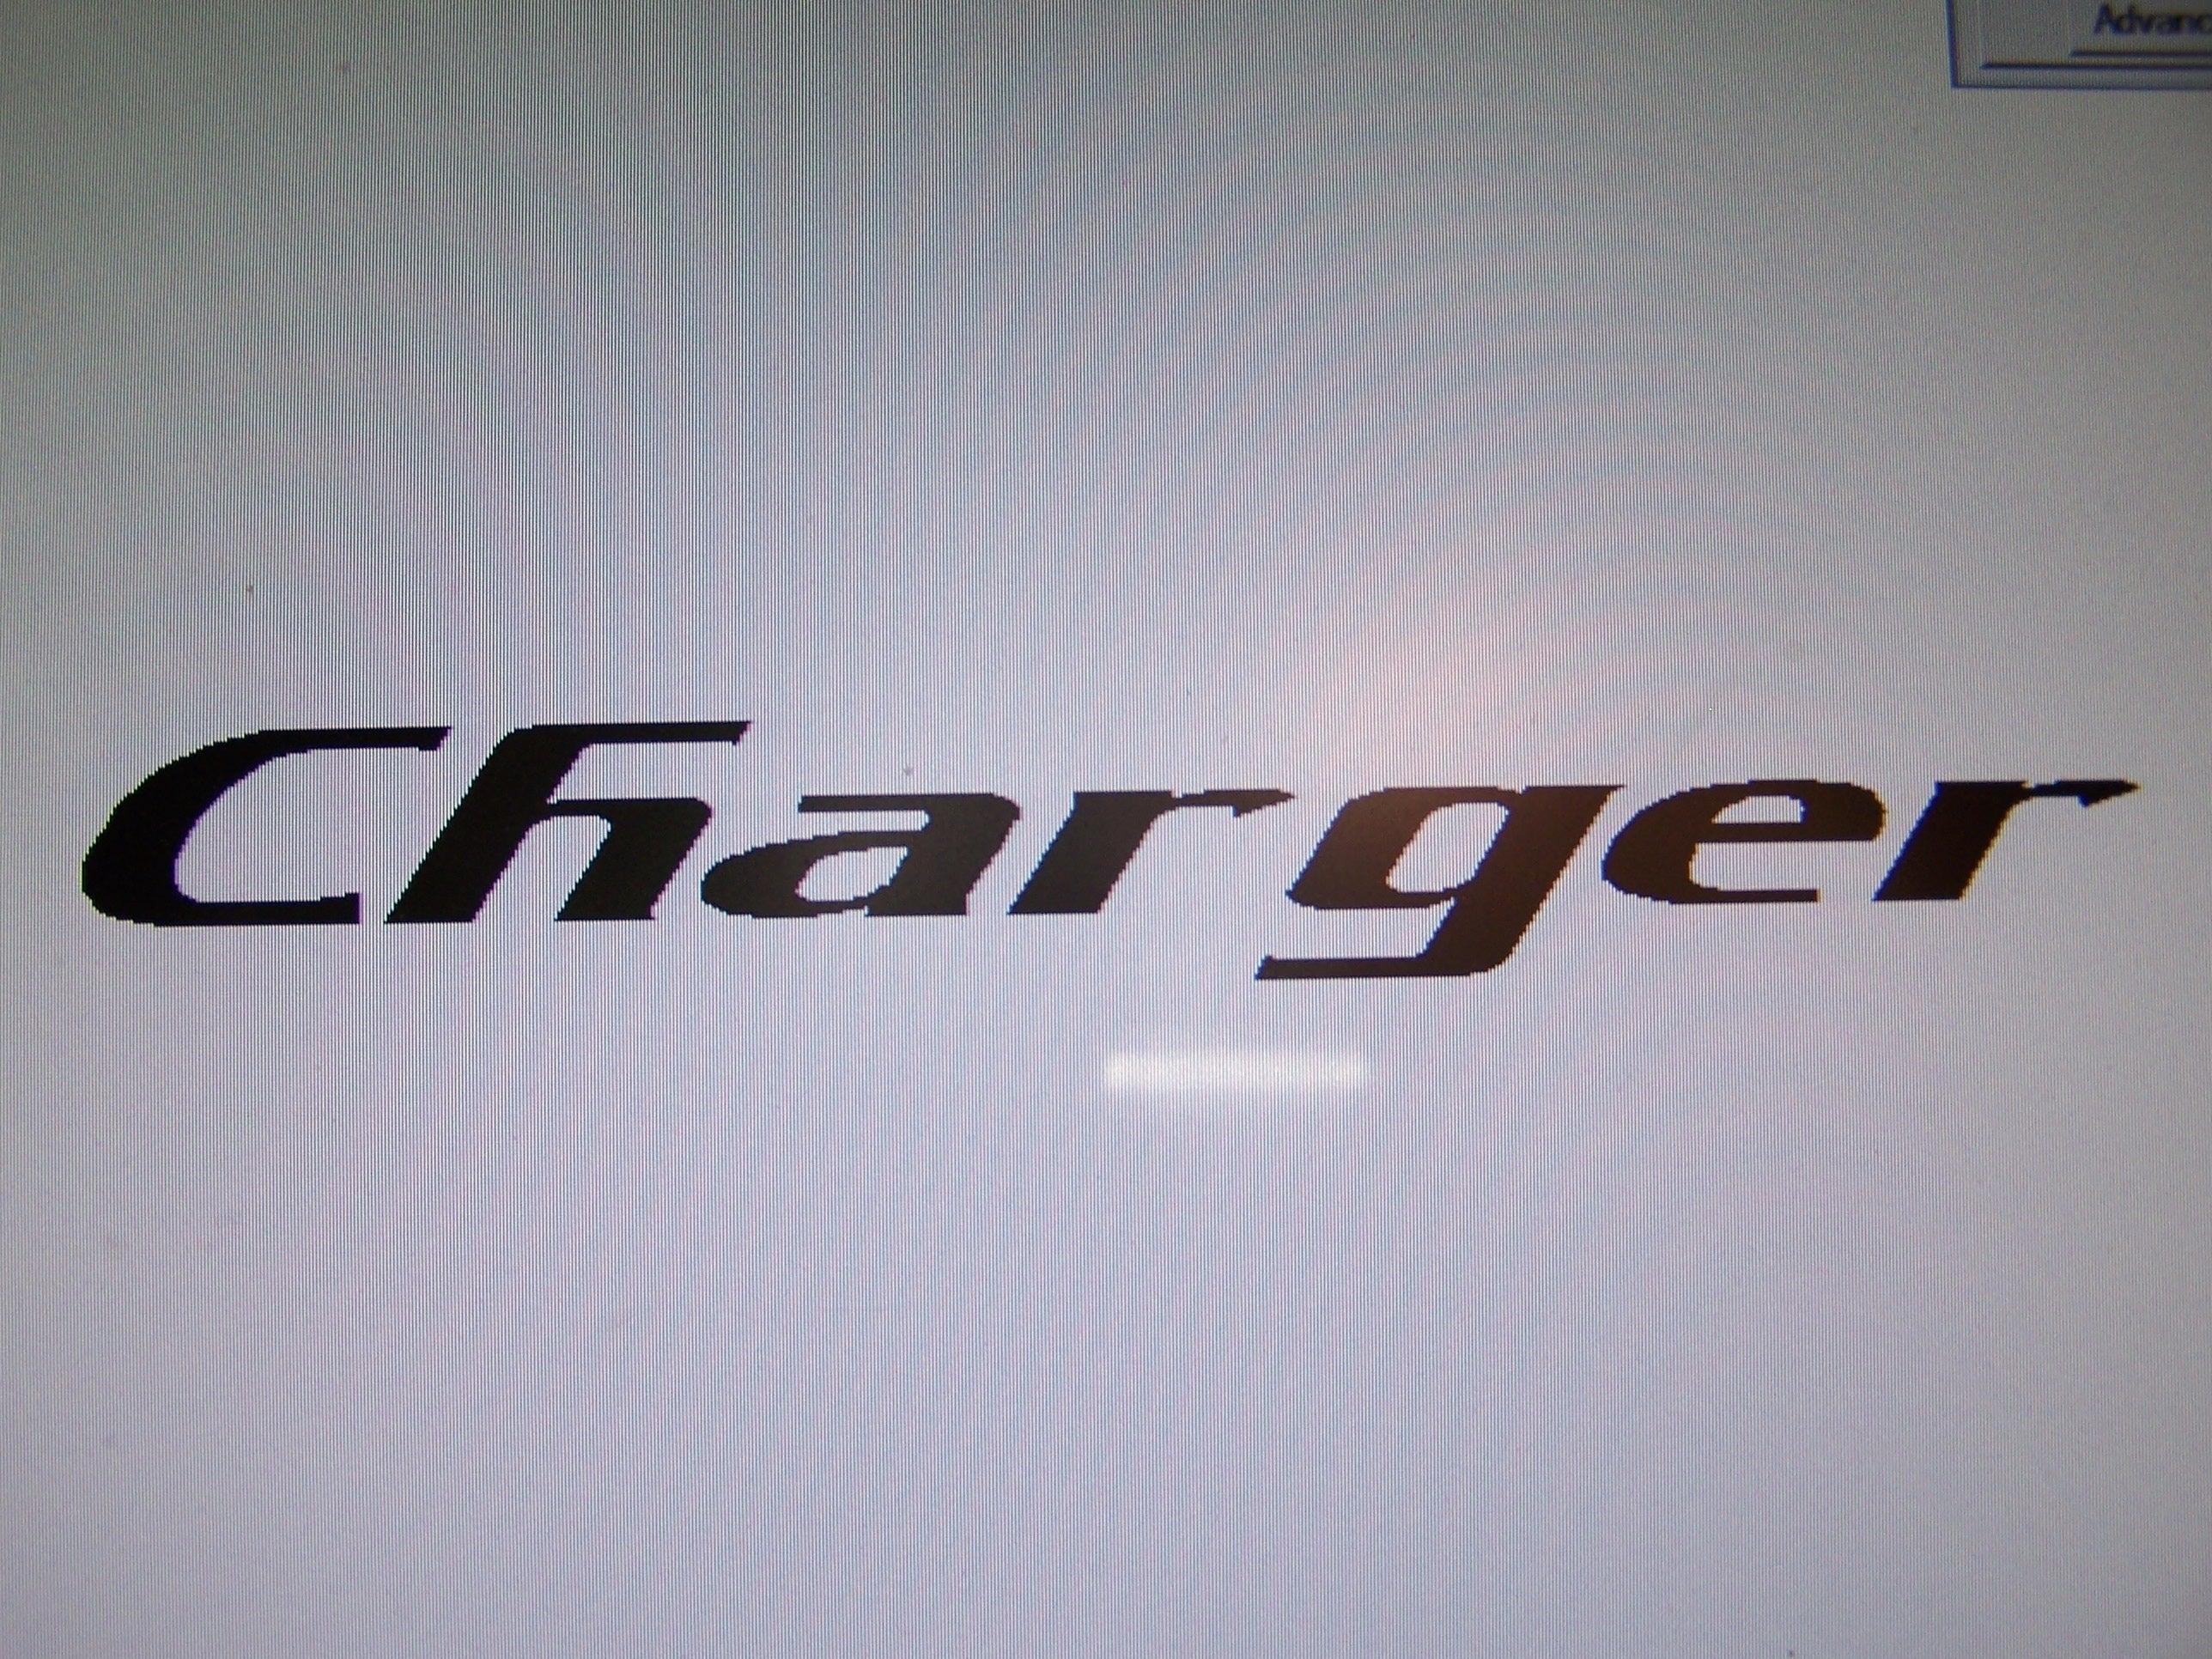 CHARGER WINDSHIELD DECAL BANNER CHOOSE COLOR AND SIZE